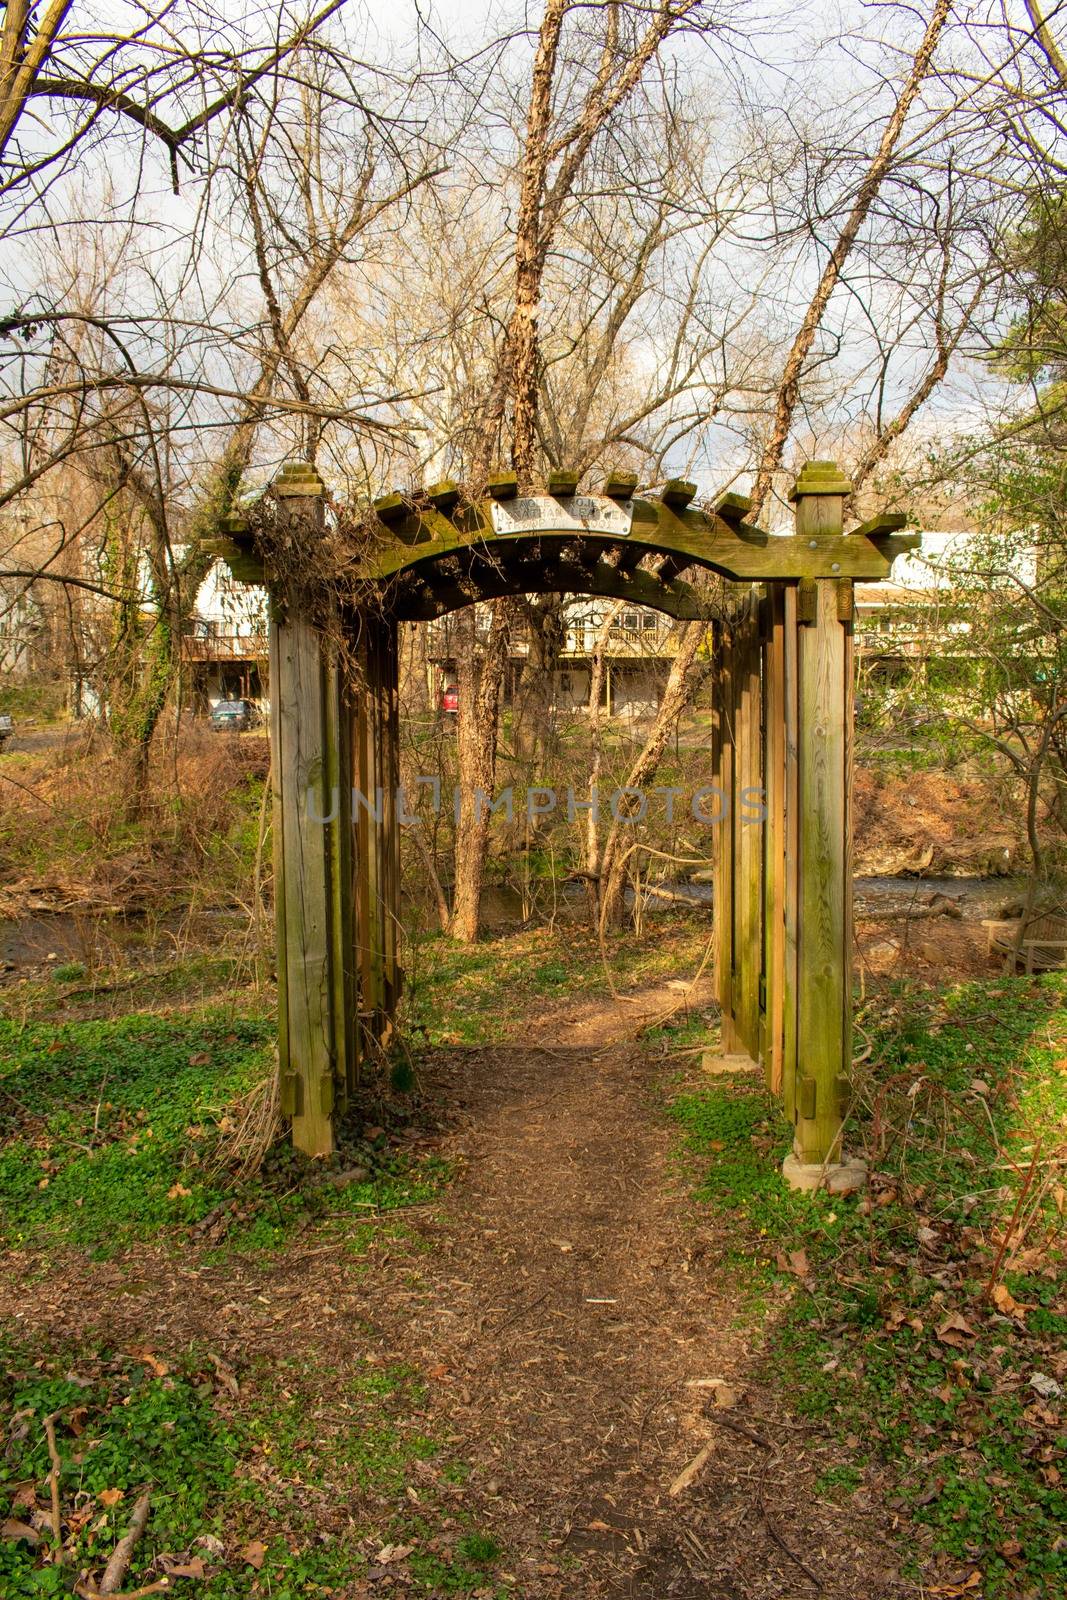 A Garden Arch in the woods of a park in Suburban Pennsylvania by bju12290